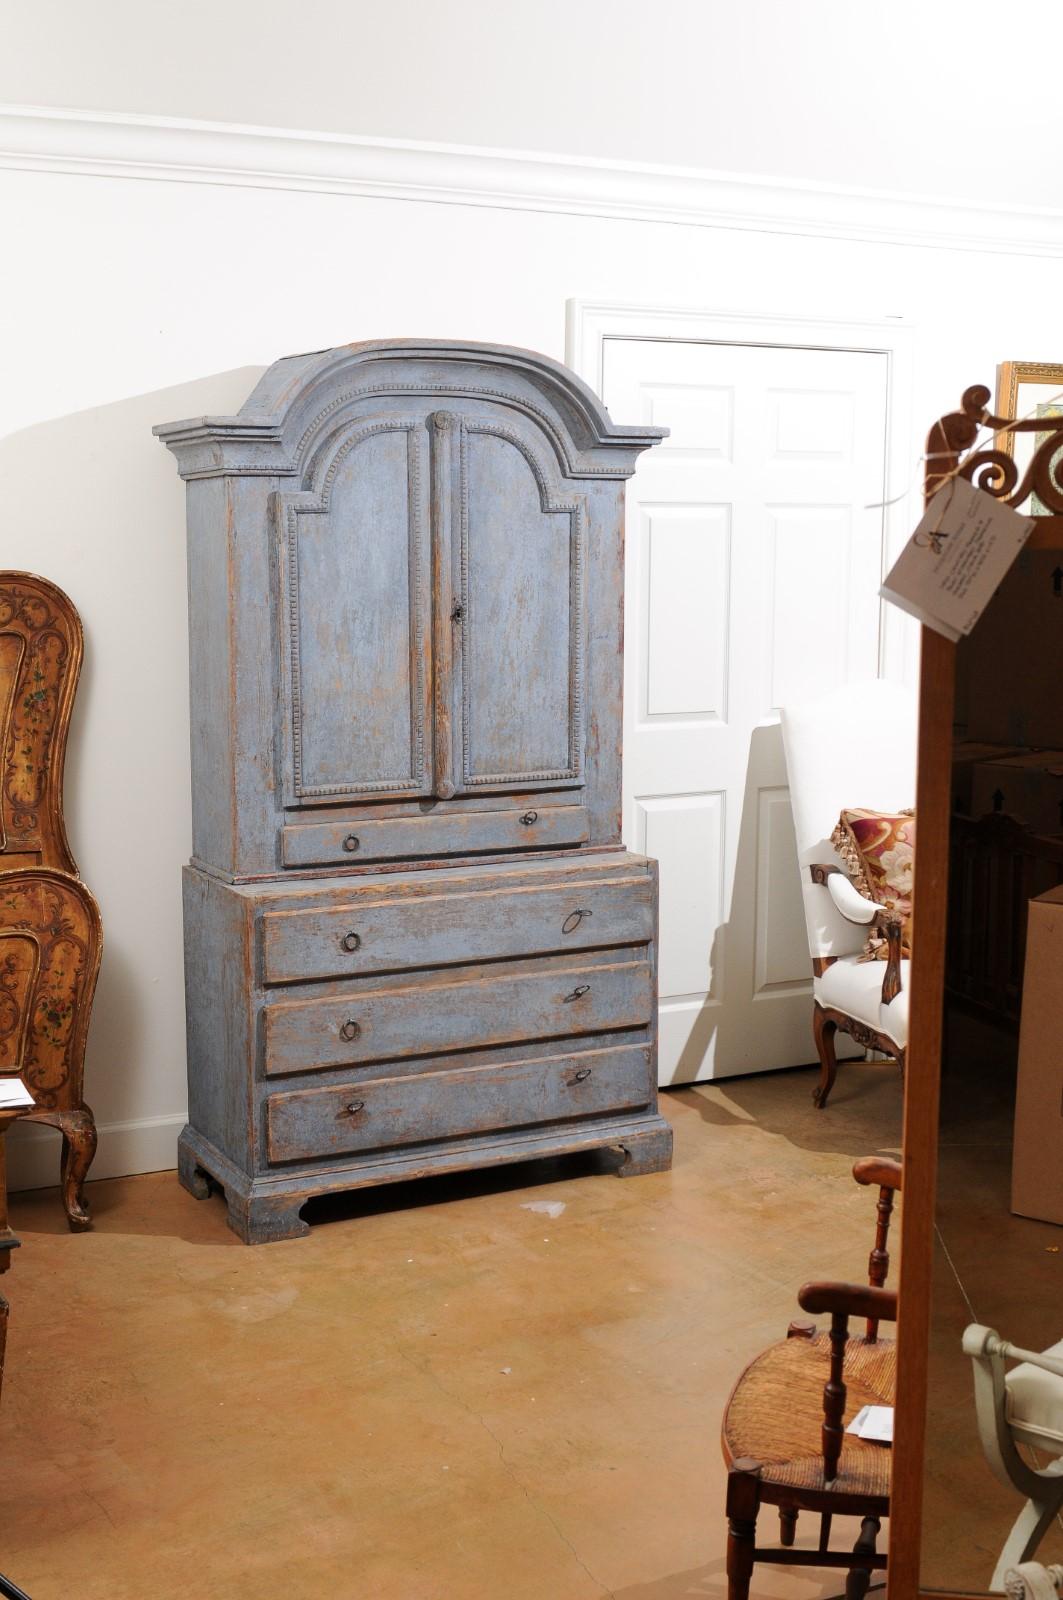 A Swedish Provincial cabinet from the late 18th century, with bonnet top, doors, drawers and nicely weathered patina. Created in Sweden during the last decade of the 18th century, this painted cabinet draws our attention with its bonnet top sitting